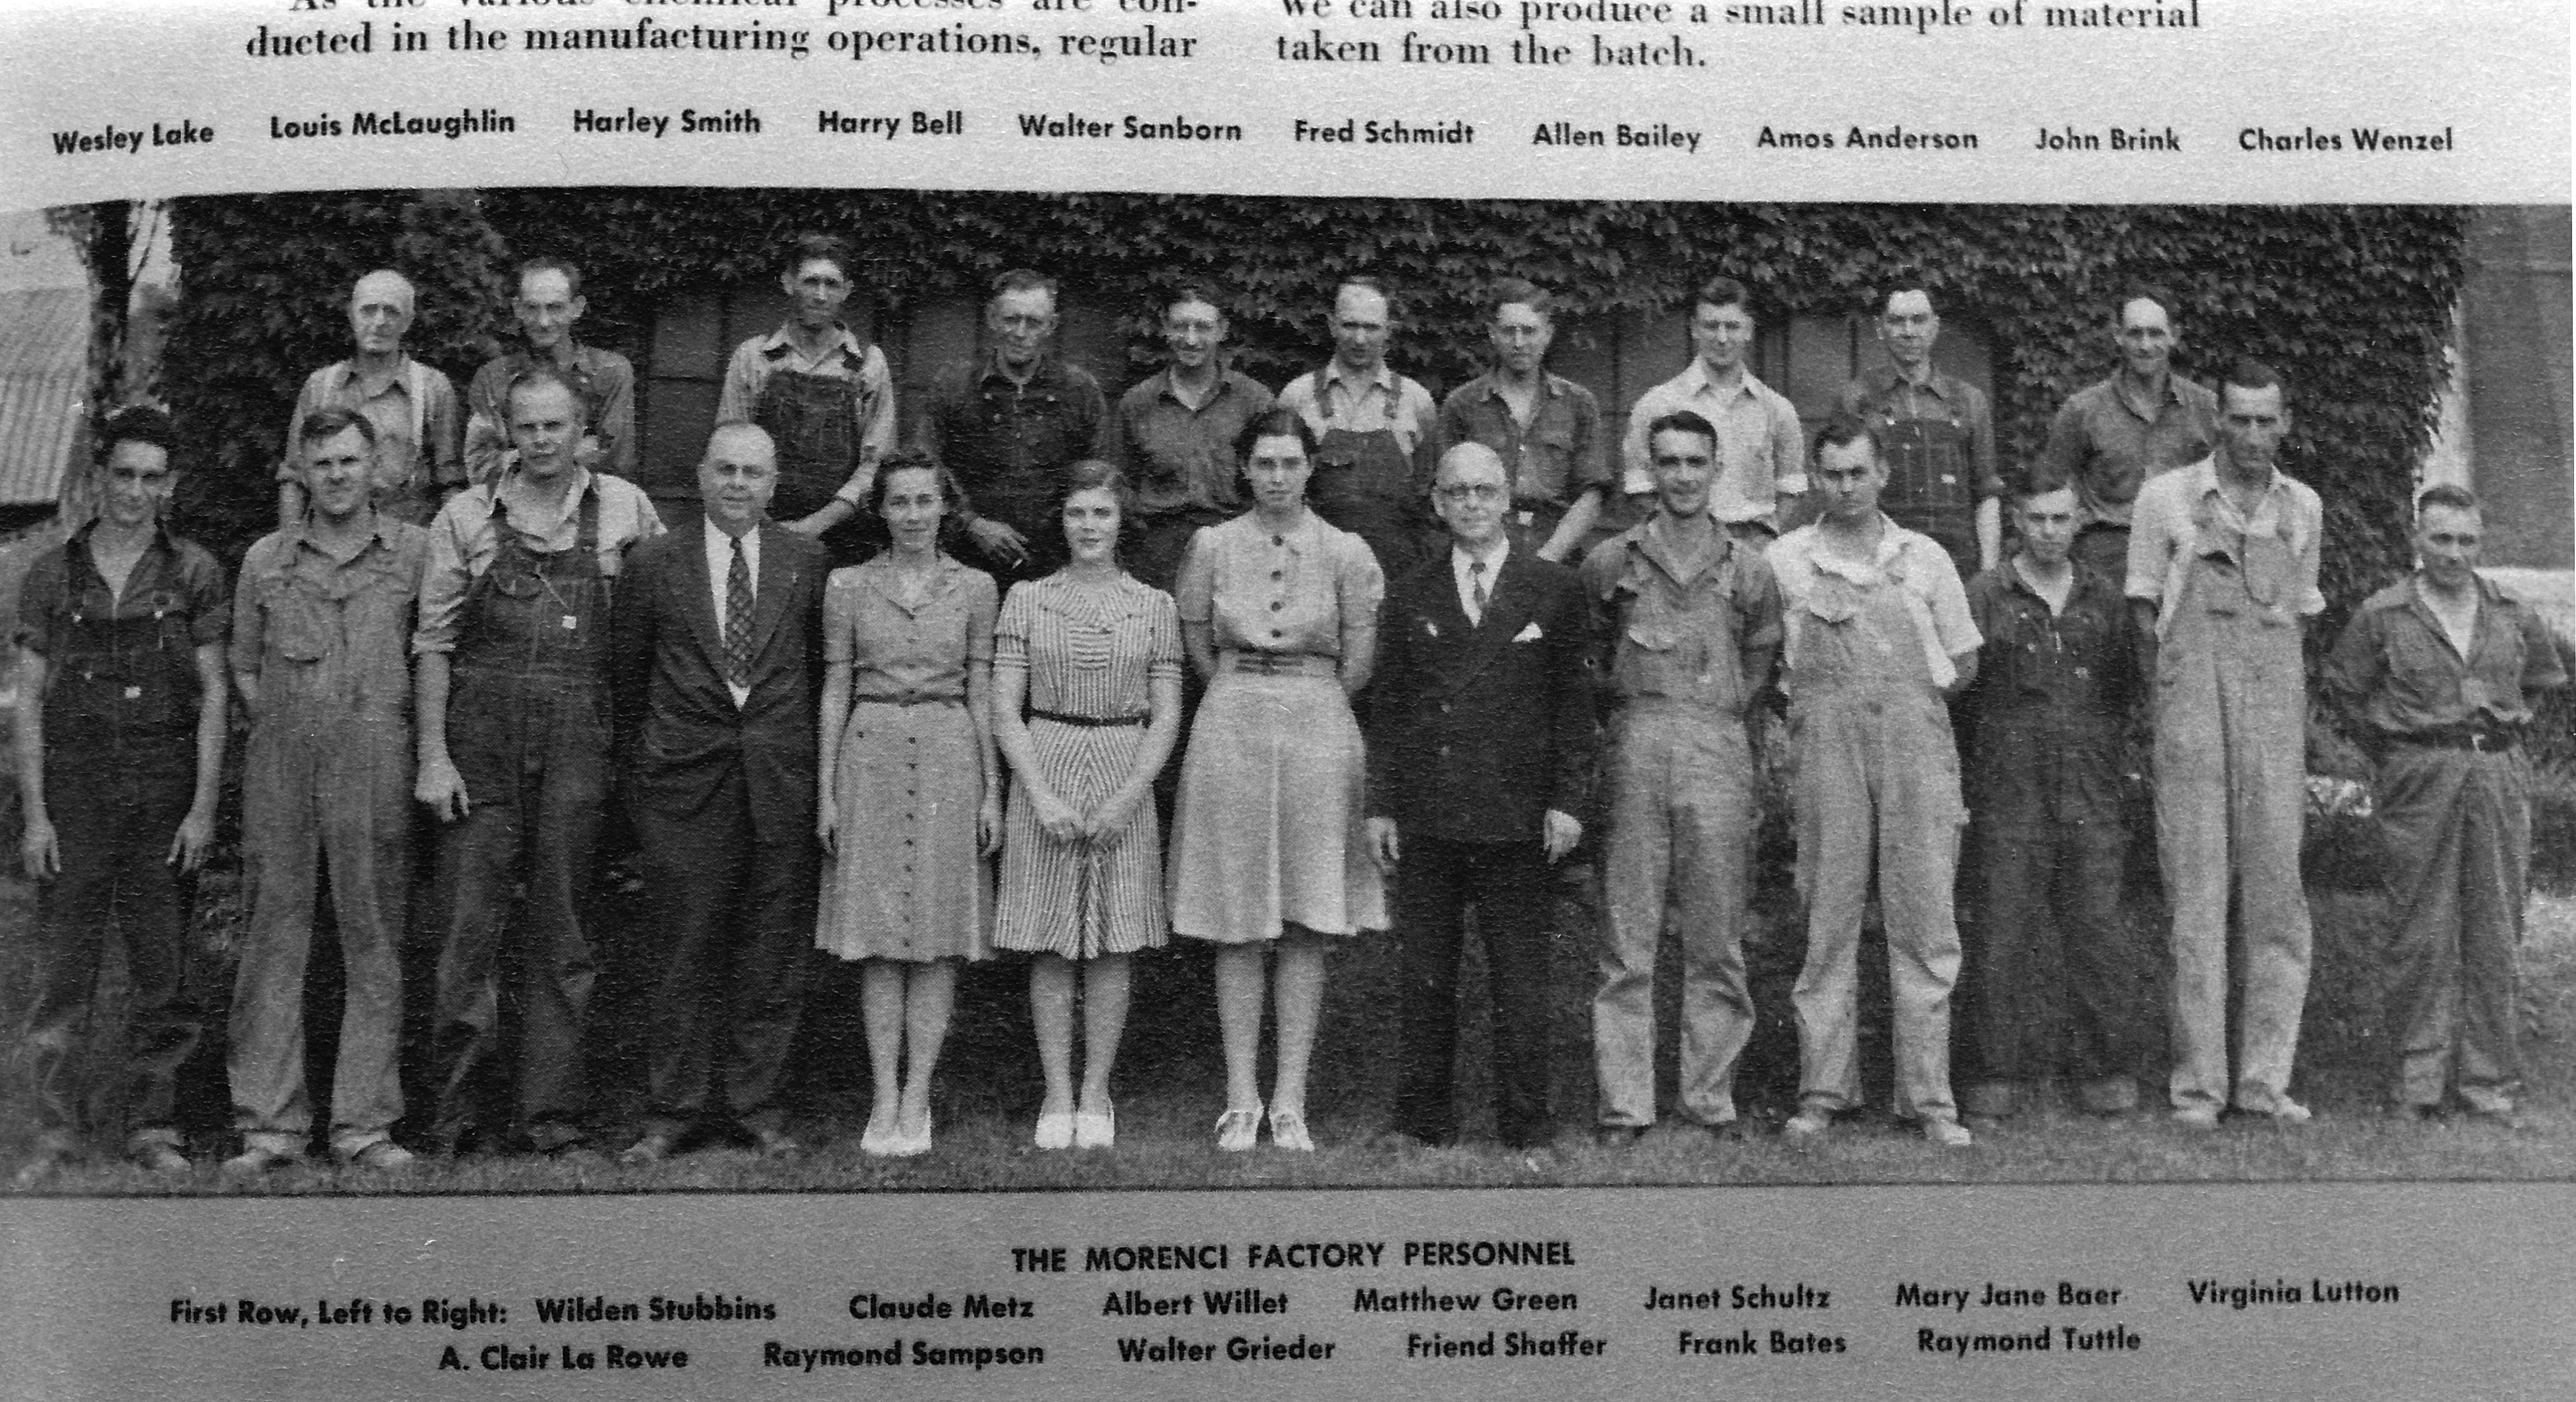 Parker Rust Proof Company and employees.   1941.   Top Row (l-r) Wesley Lake, Louis McLaughlin, Harley Smith, Harry Bell, Walter Sanborn, Fred Schmidt, Allen Bailey, Amos Anderson, John Brink, Charles Wenzel. First Row (l-r) Wilden Stubbins, Claude Metz, Albert Willet, Matt Green, Janet Shultz, Mary Jane Baer, Virginia Lutton, A. Clair LaRowe, Raymond Sampson, Walter Grieder, Friend Shaffer, Frank Bates, Ray  Tuttle.